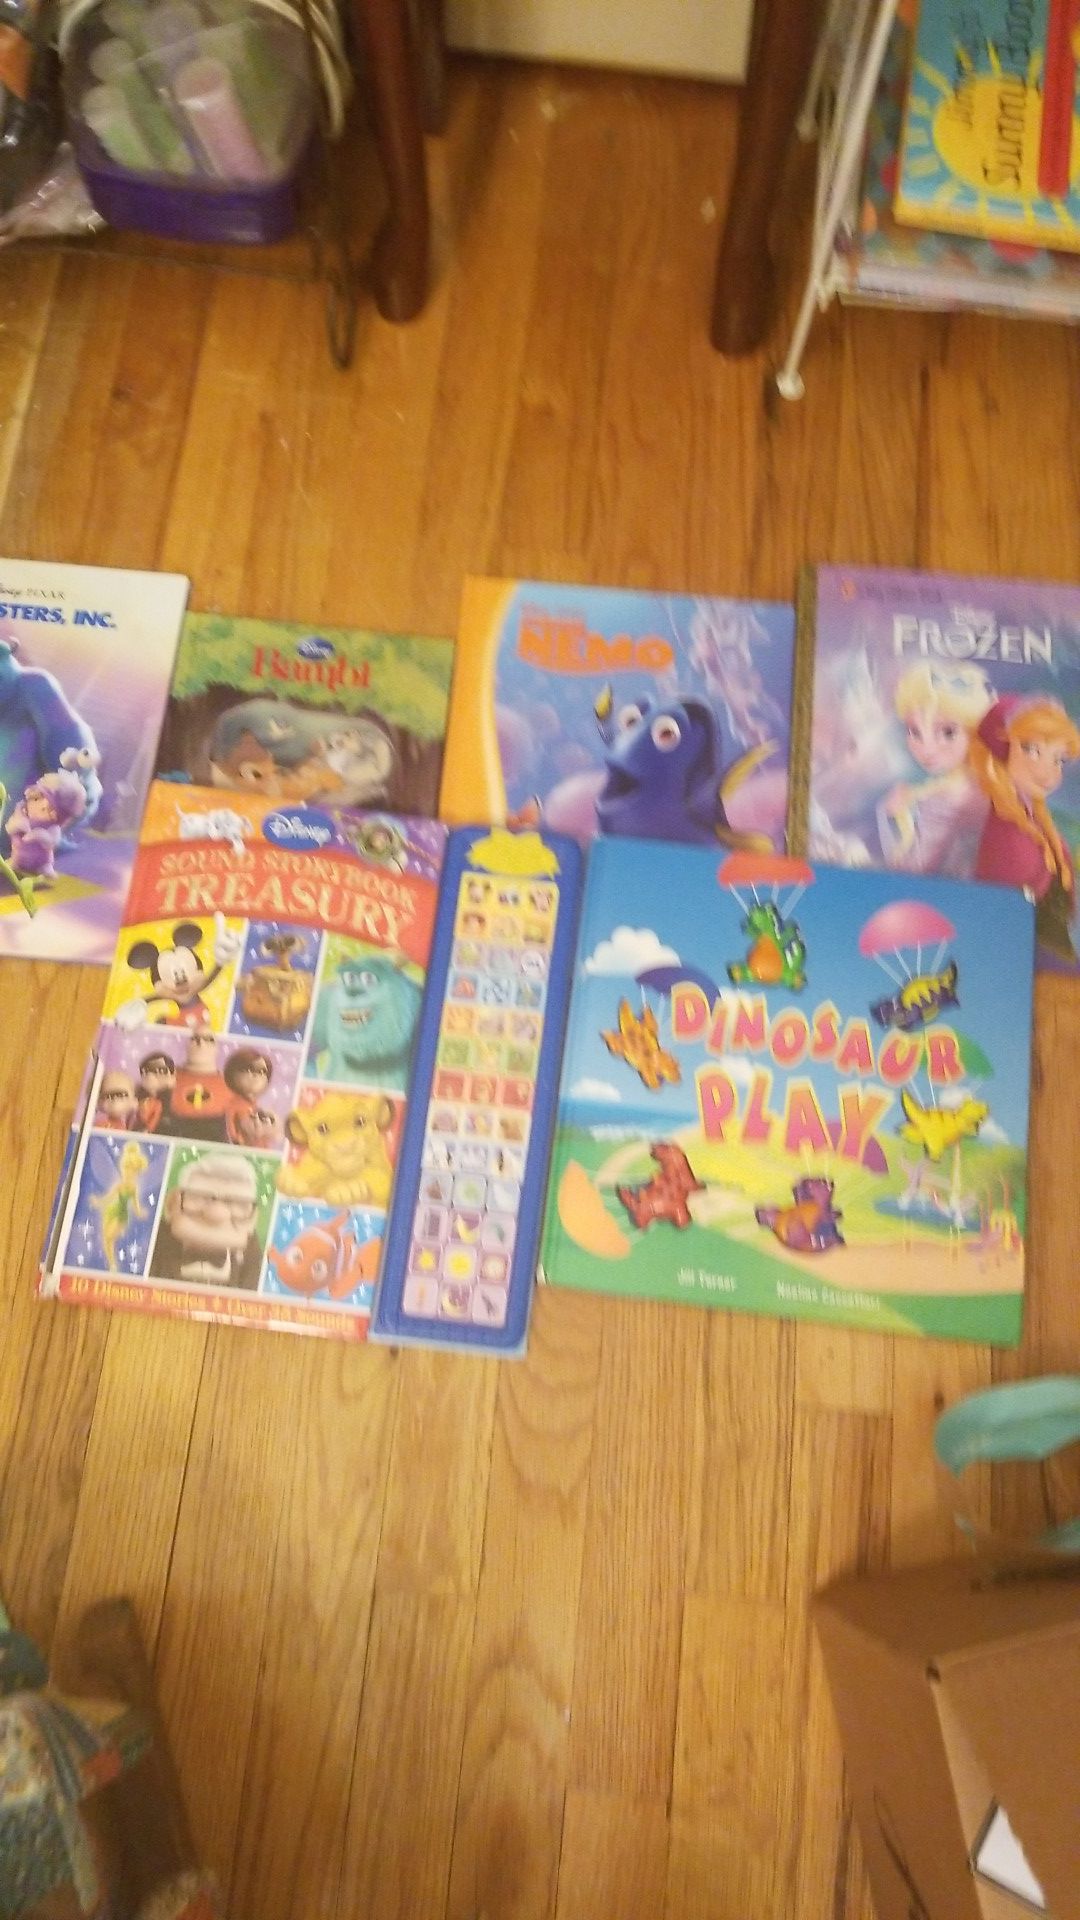 Frozen book, finding Nemo book , a bambi book, monsters inc book, and other